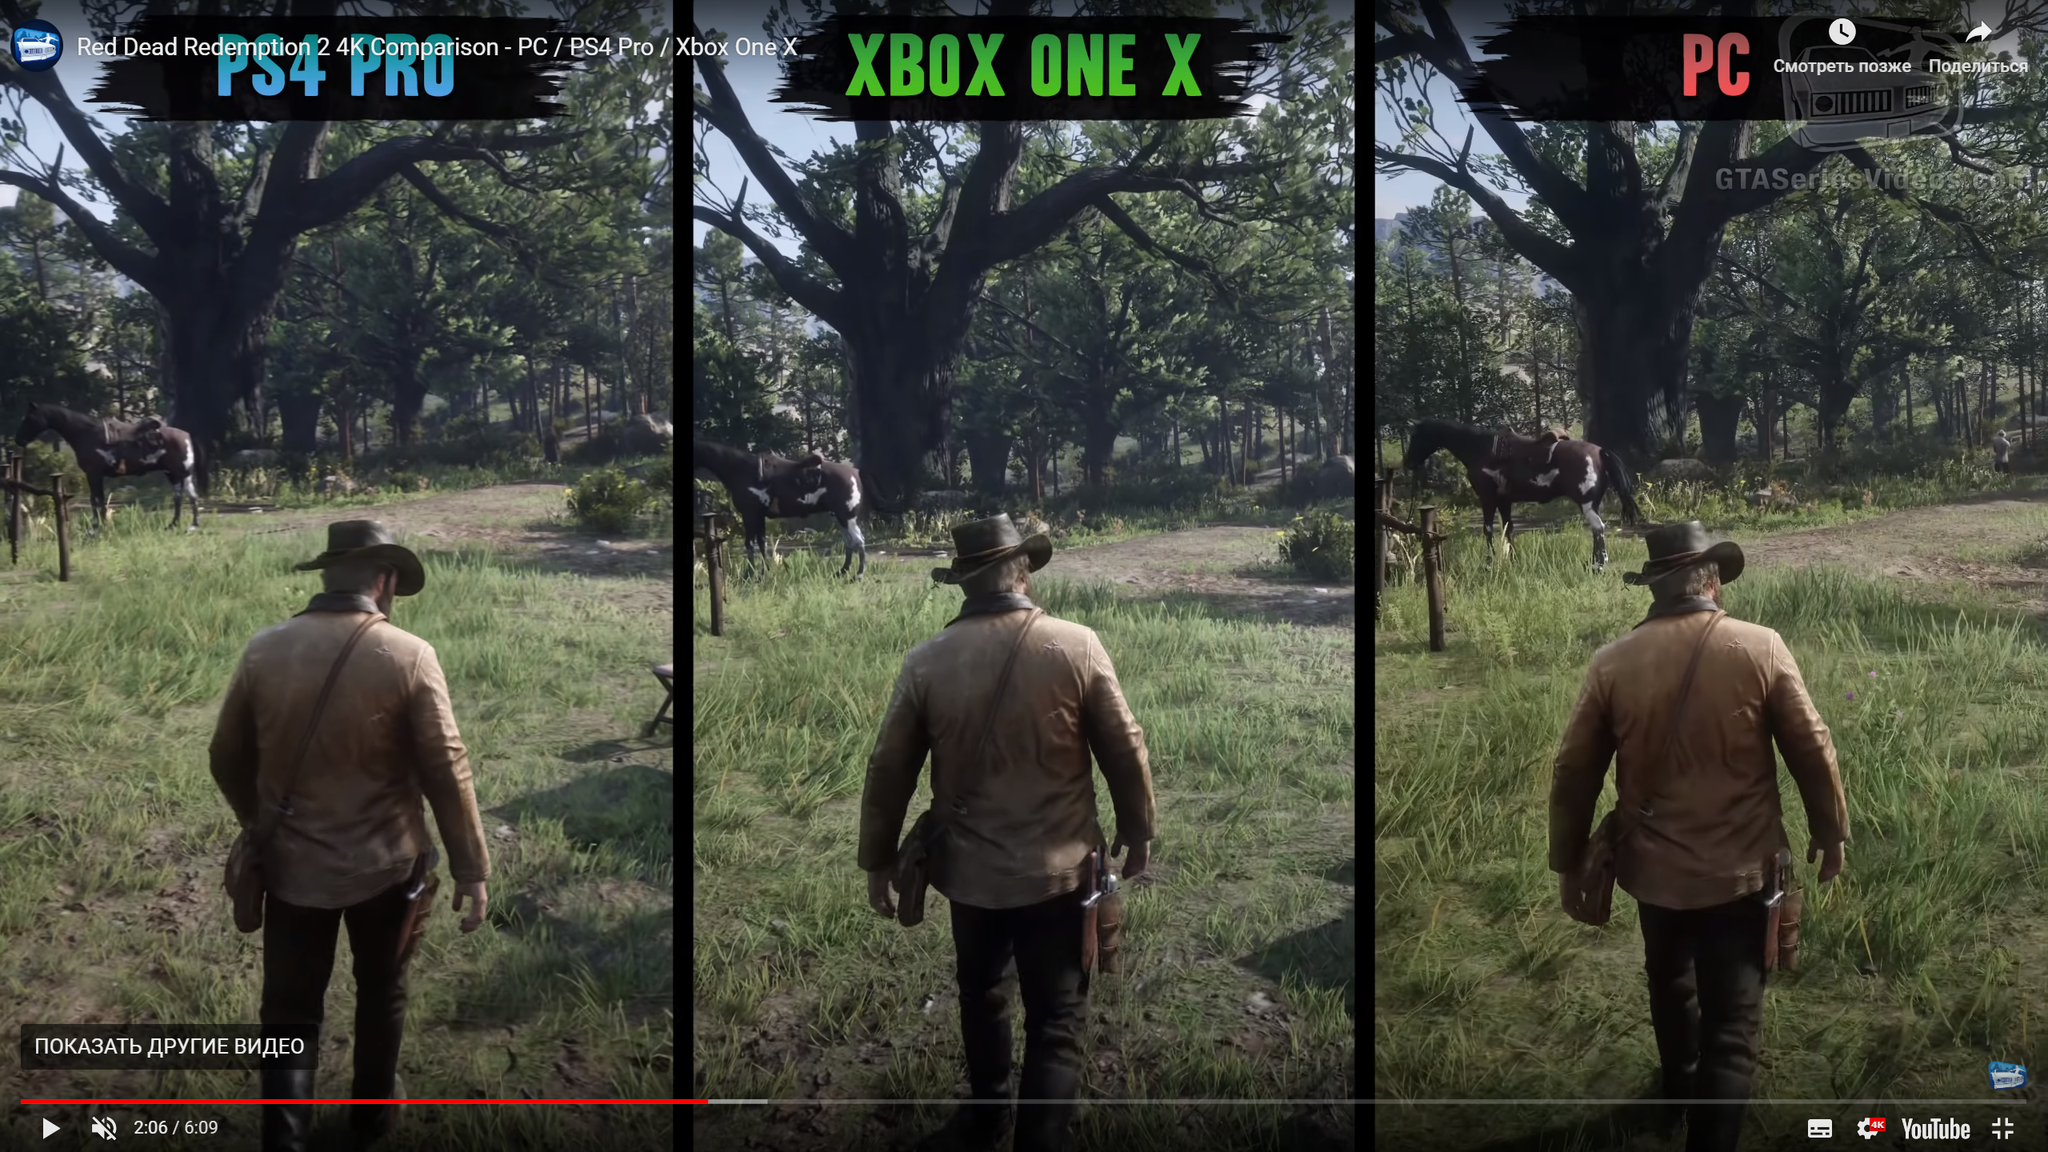 Рдр 1 xbox. Xbox one Red Dead Redemption 2. Rdr 2 ПК vs Xbox one. Xbox one x Red Dead Redemption 2. Red Dead Redemption 2 Xbox one vs ps4.